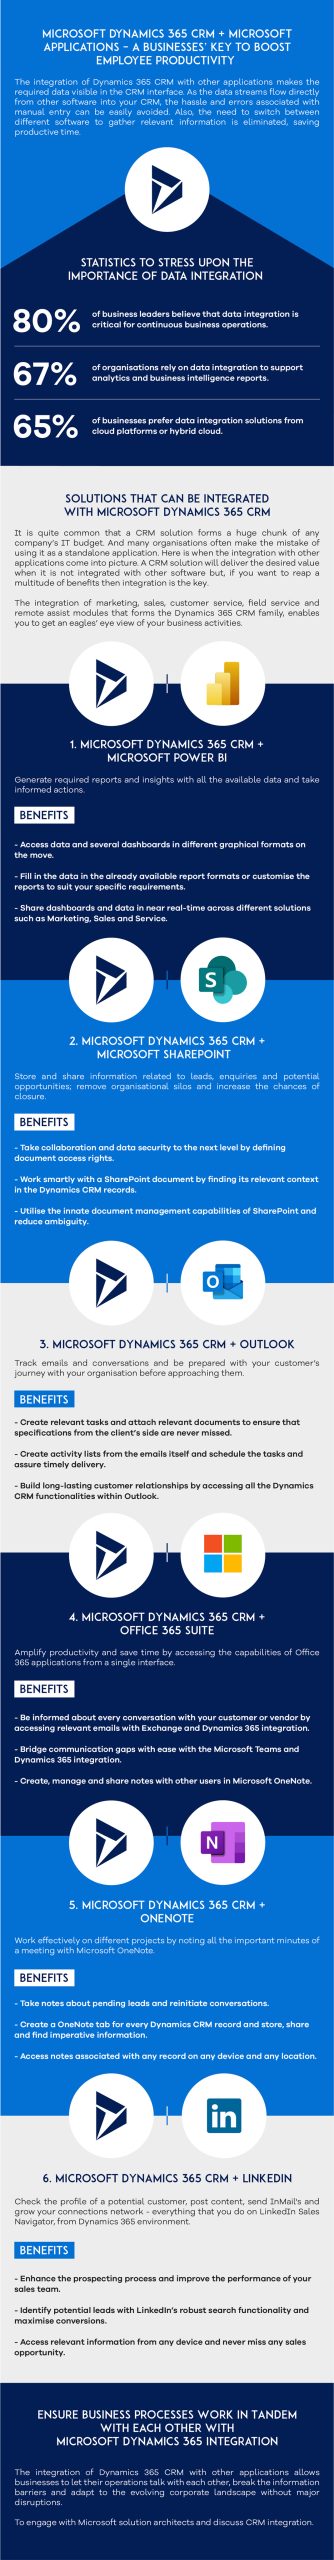 The Business Benefits of Microsoft Dynamics 365 CRM Integration with Other Critical Applications